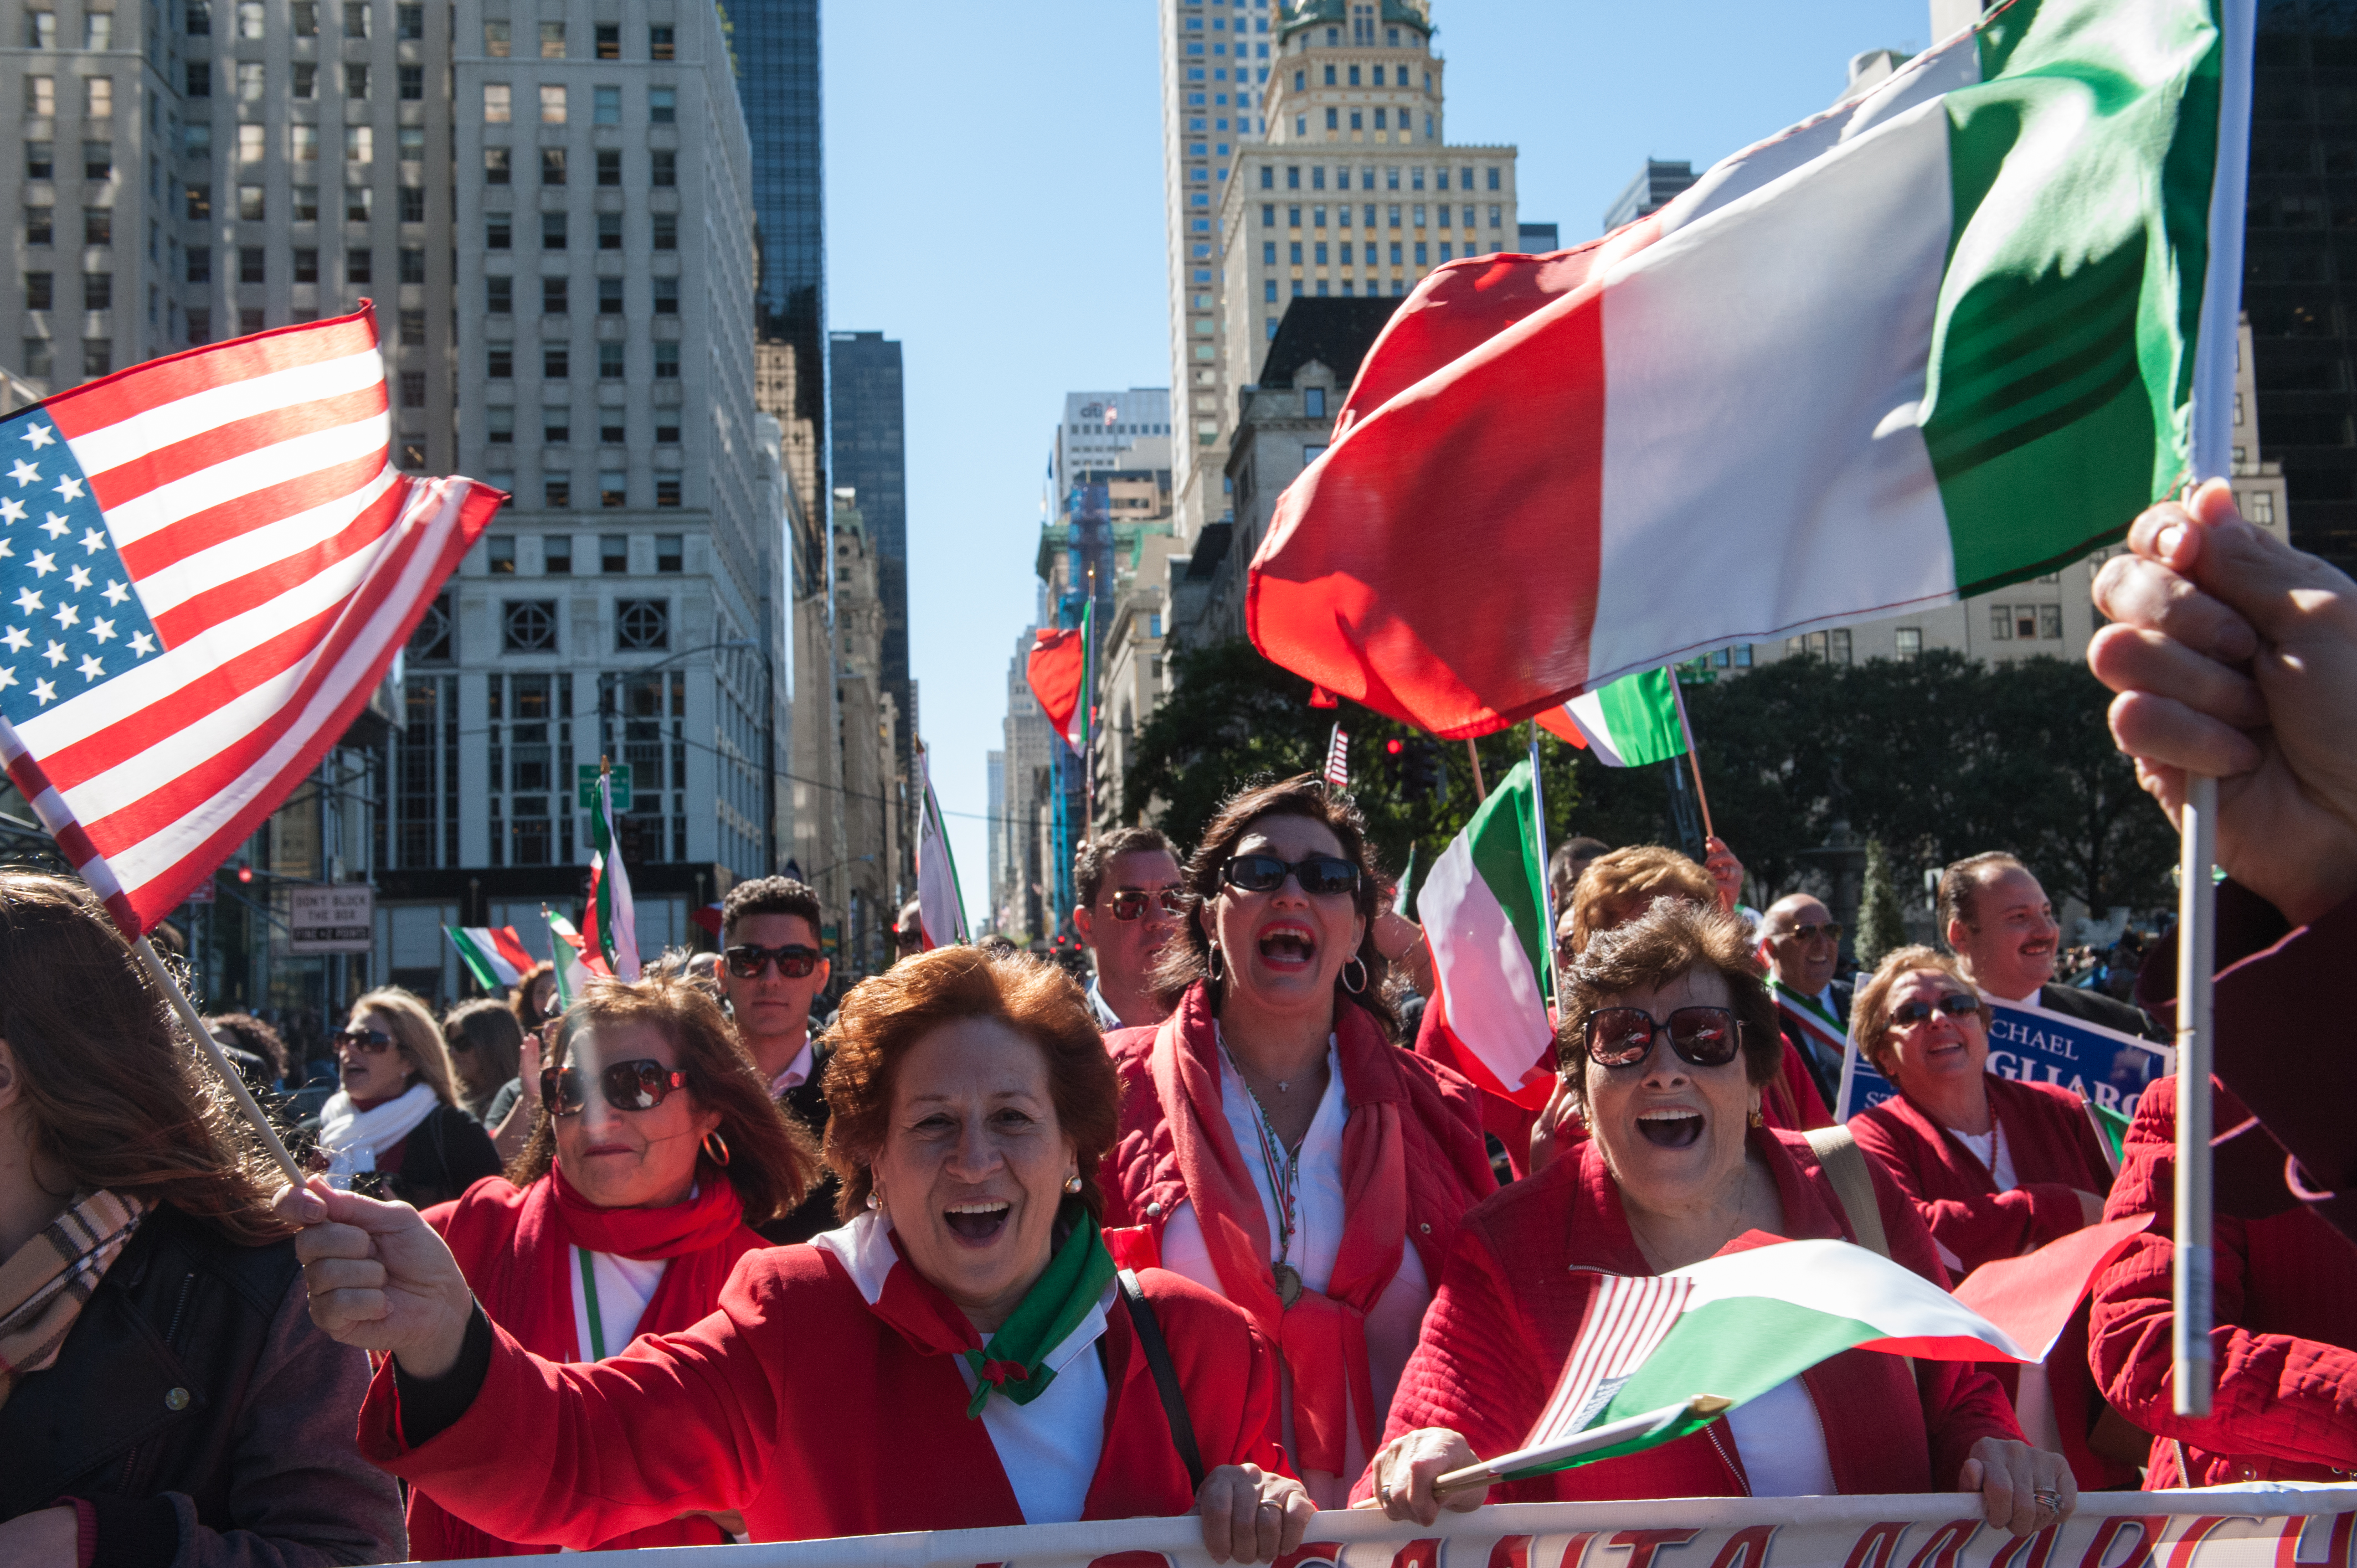 Parade goers at the annual Columbus Day Parade in New York City. People are wearing red jackets and holding up the flags of Italy and the United States. The people are in the street and there are various city buildings in the background.